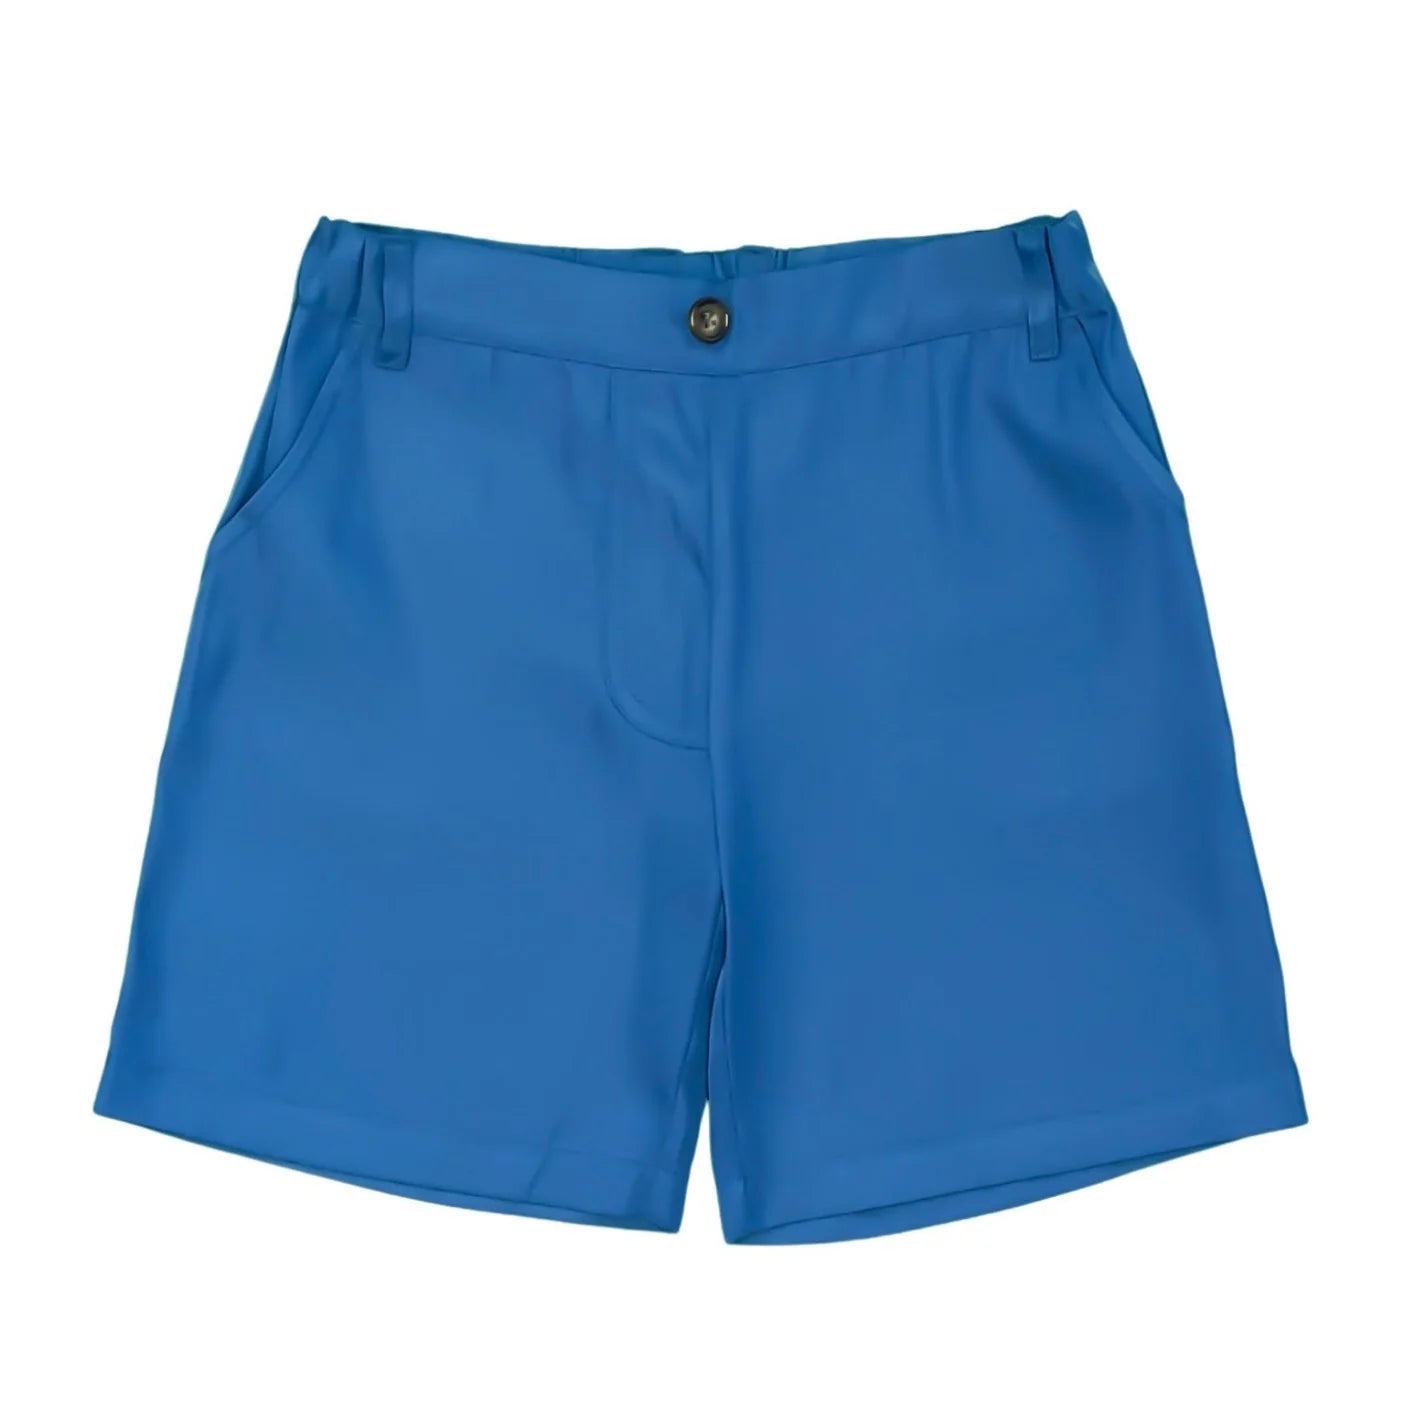 Teal Ponce Performance Shorts